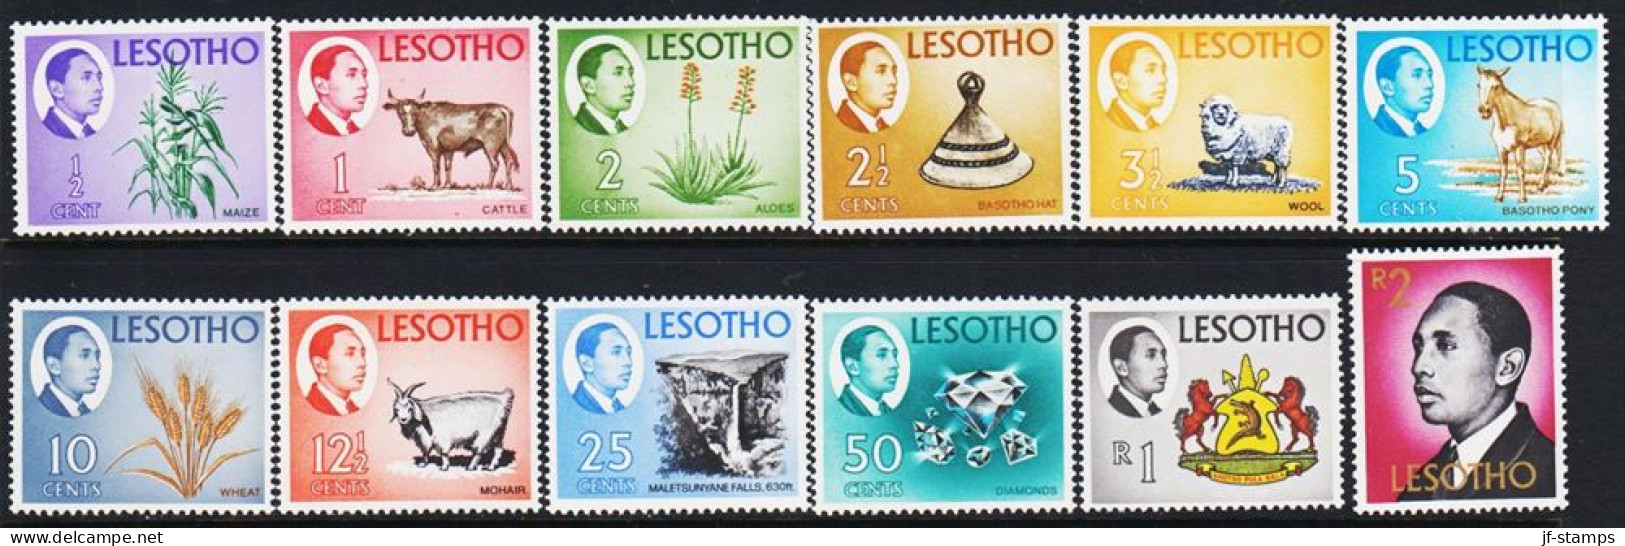 1967. LESOTHO. Country Motives And Products, Complete Set With 12 Stamps. Never Hinged.  (Michel 25-36) - JF544640 - Lesotho (1966-...)